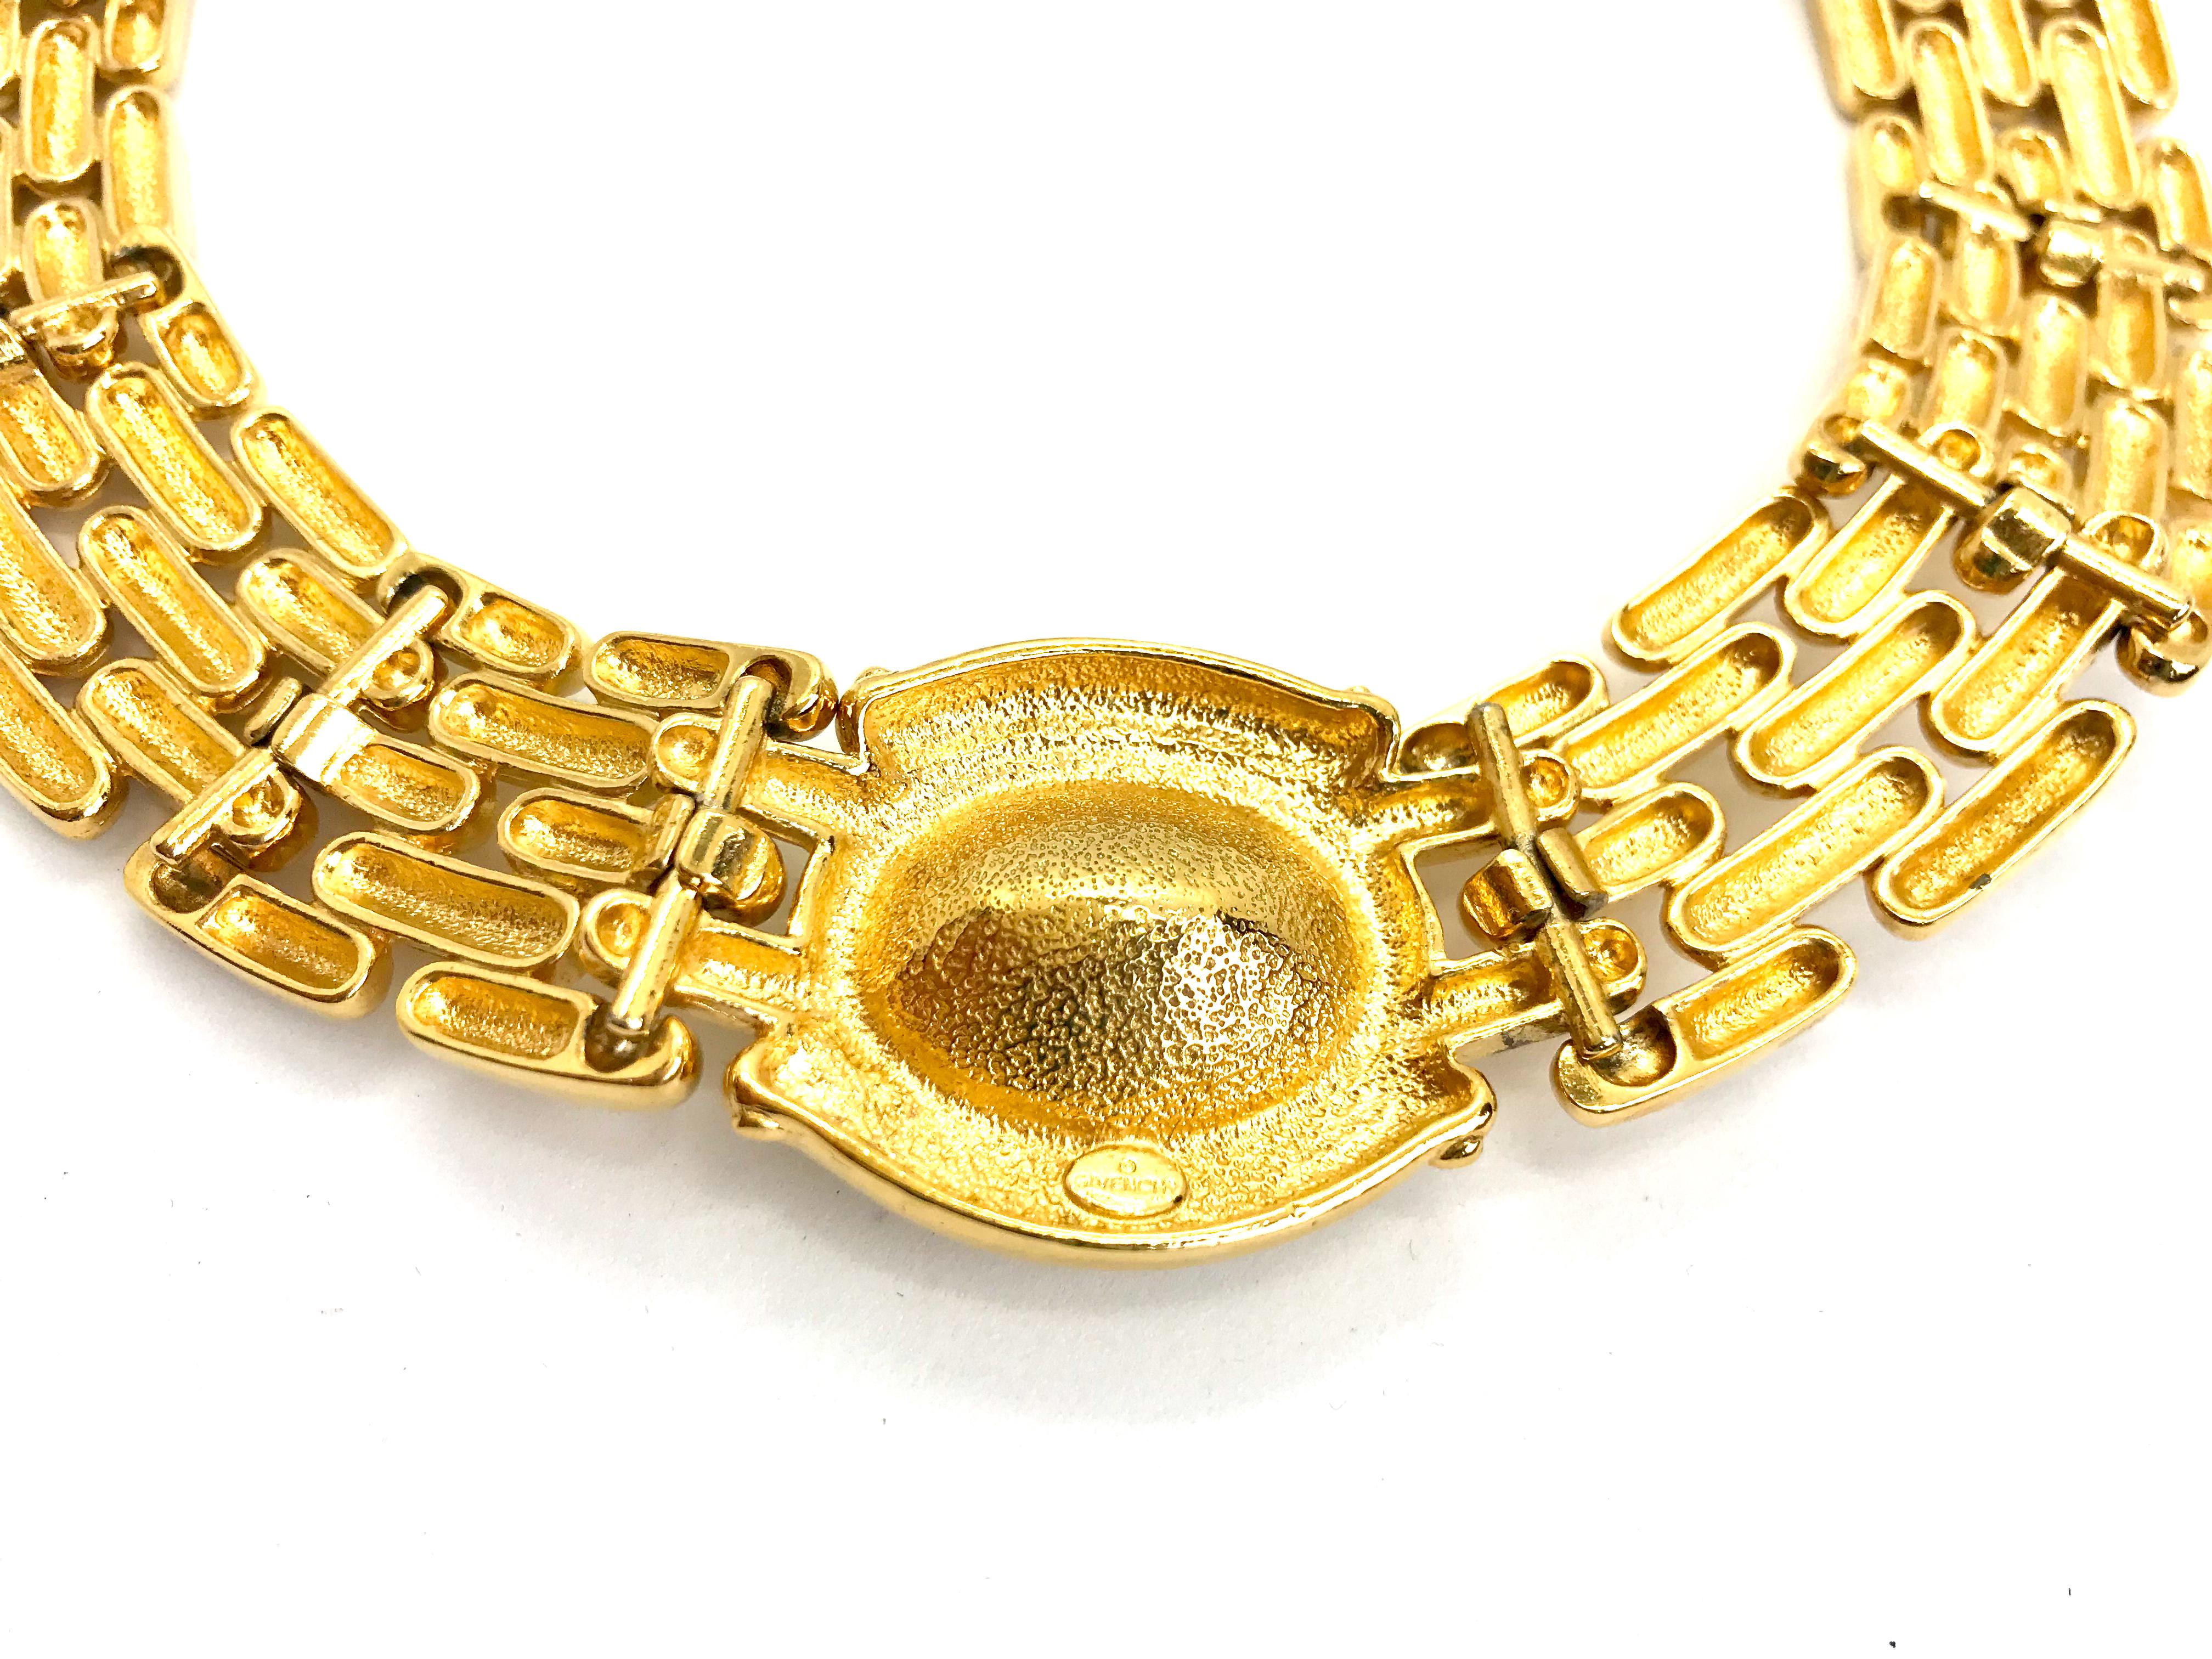 Women's or Men's Givenchy 1980s Vintage Statement Collar Necklace